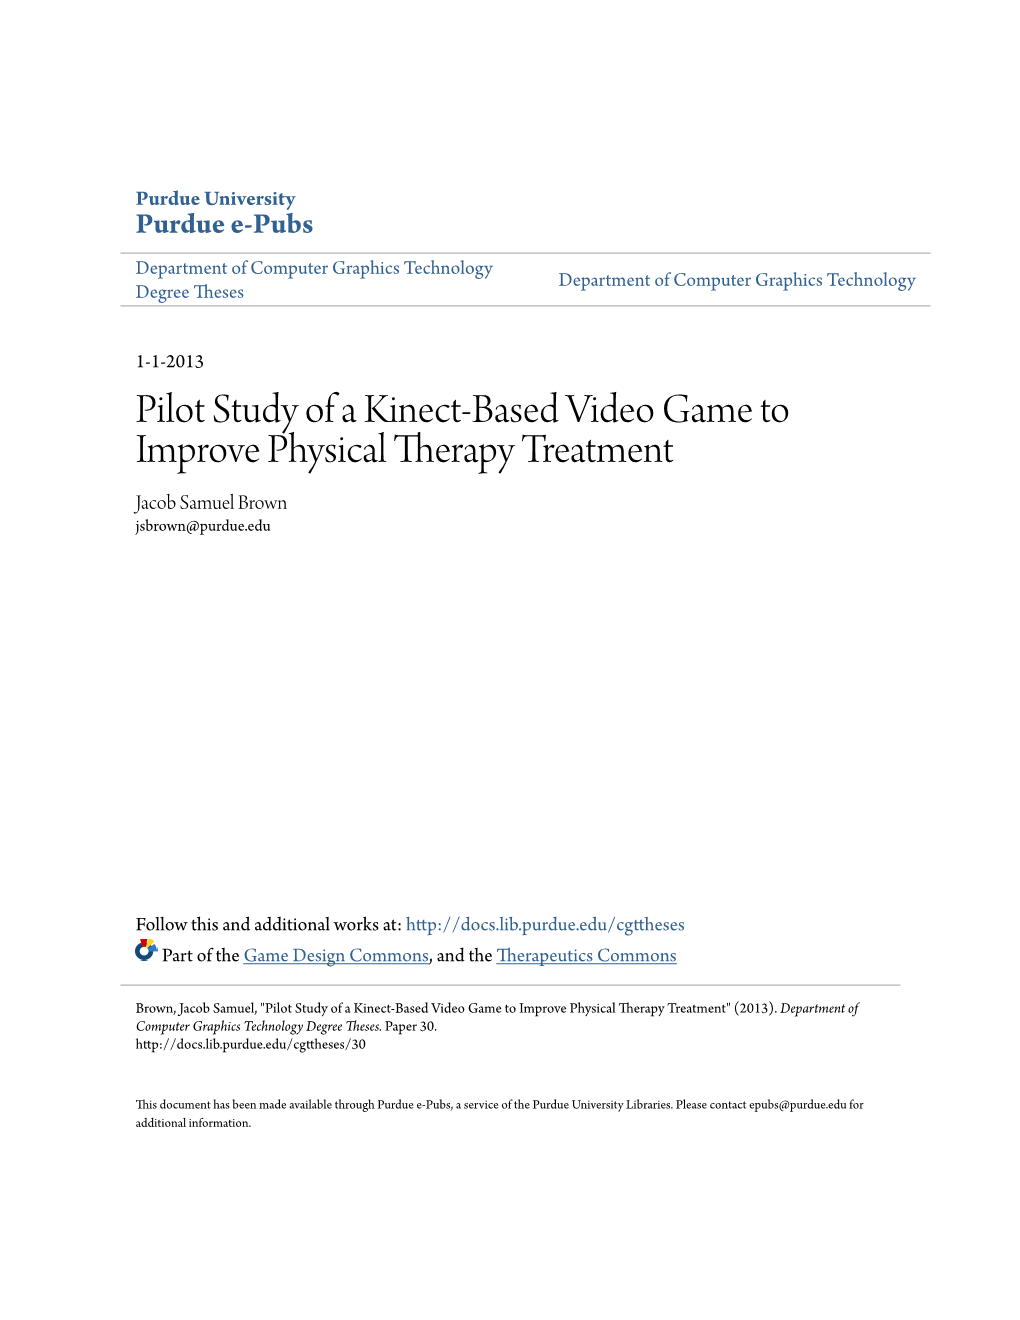 Pilot Study of a Kinect-Based Video Game to Improve Physical Therapy Treatment Jacob Samuel Brown Jsbrown@Purdue.Edu